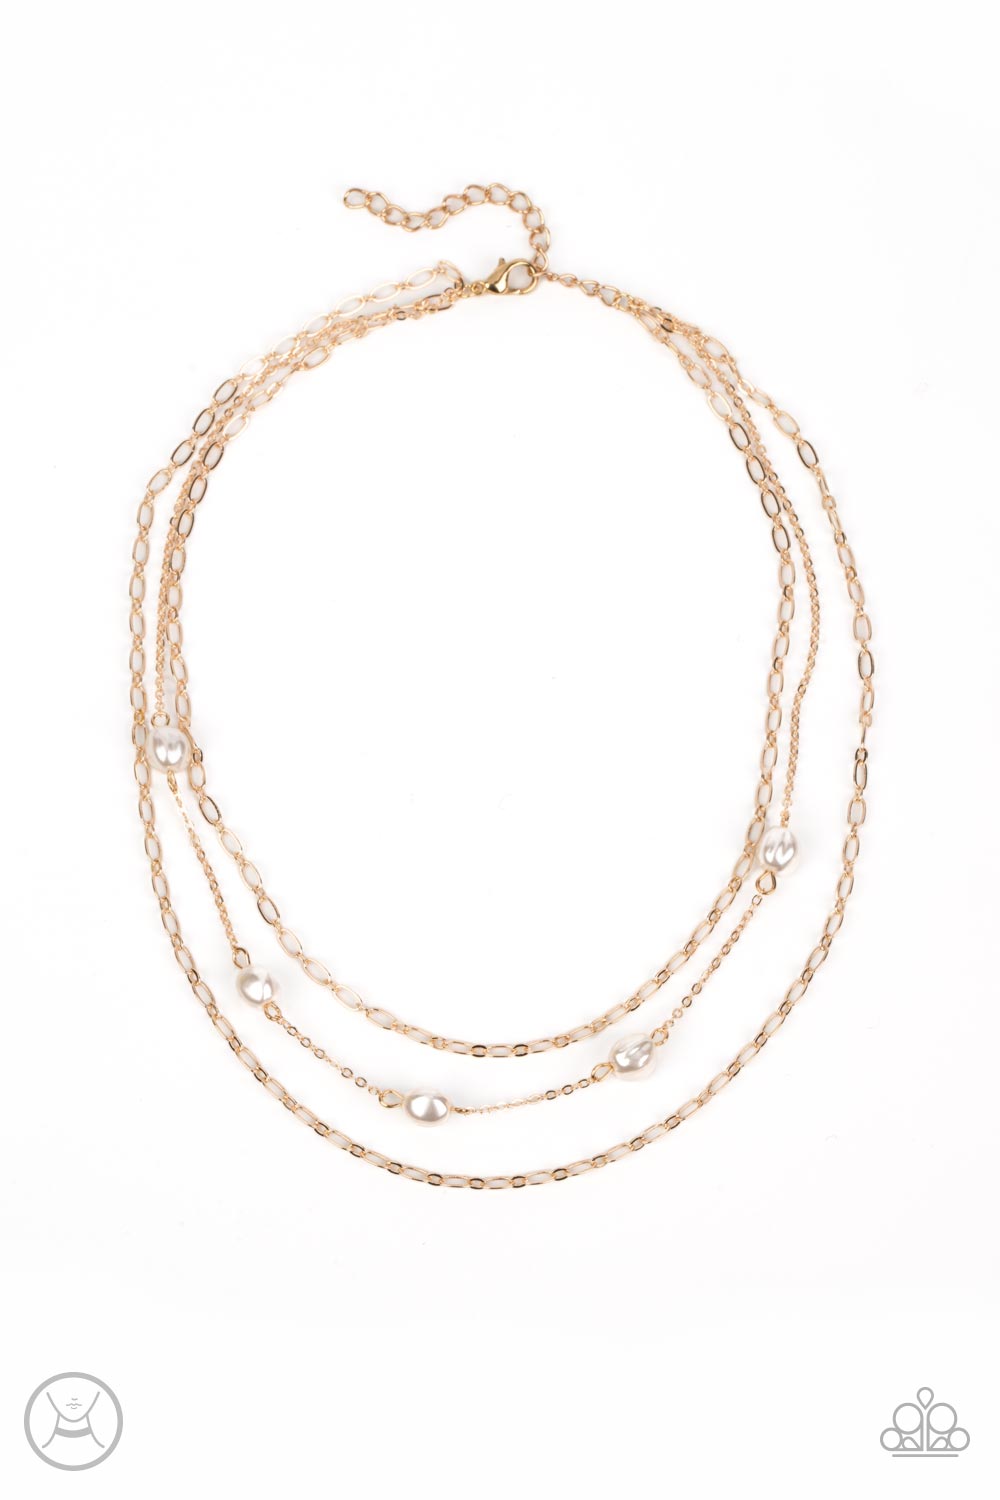 Offshore Oasis - Gold Oval-Link Chains & Imperfect White Pearl Paparazzi Necklace & matching earrings